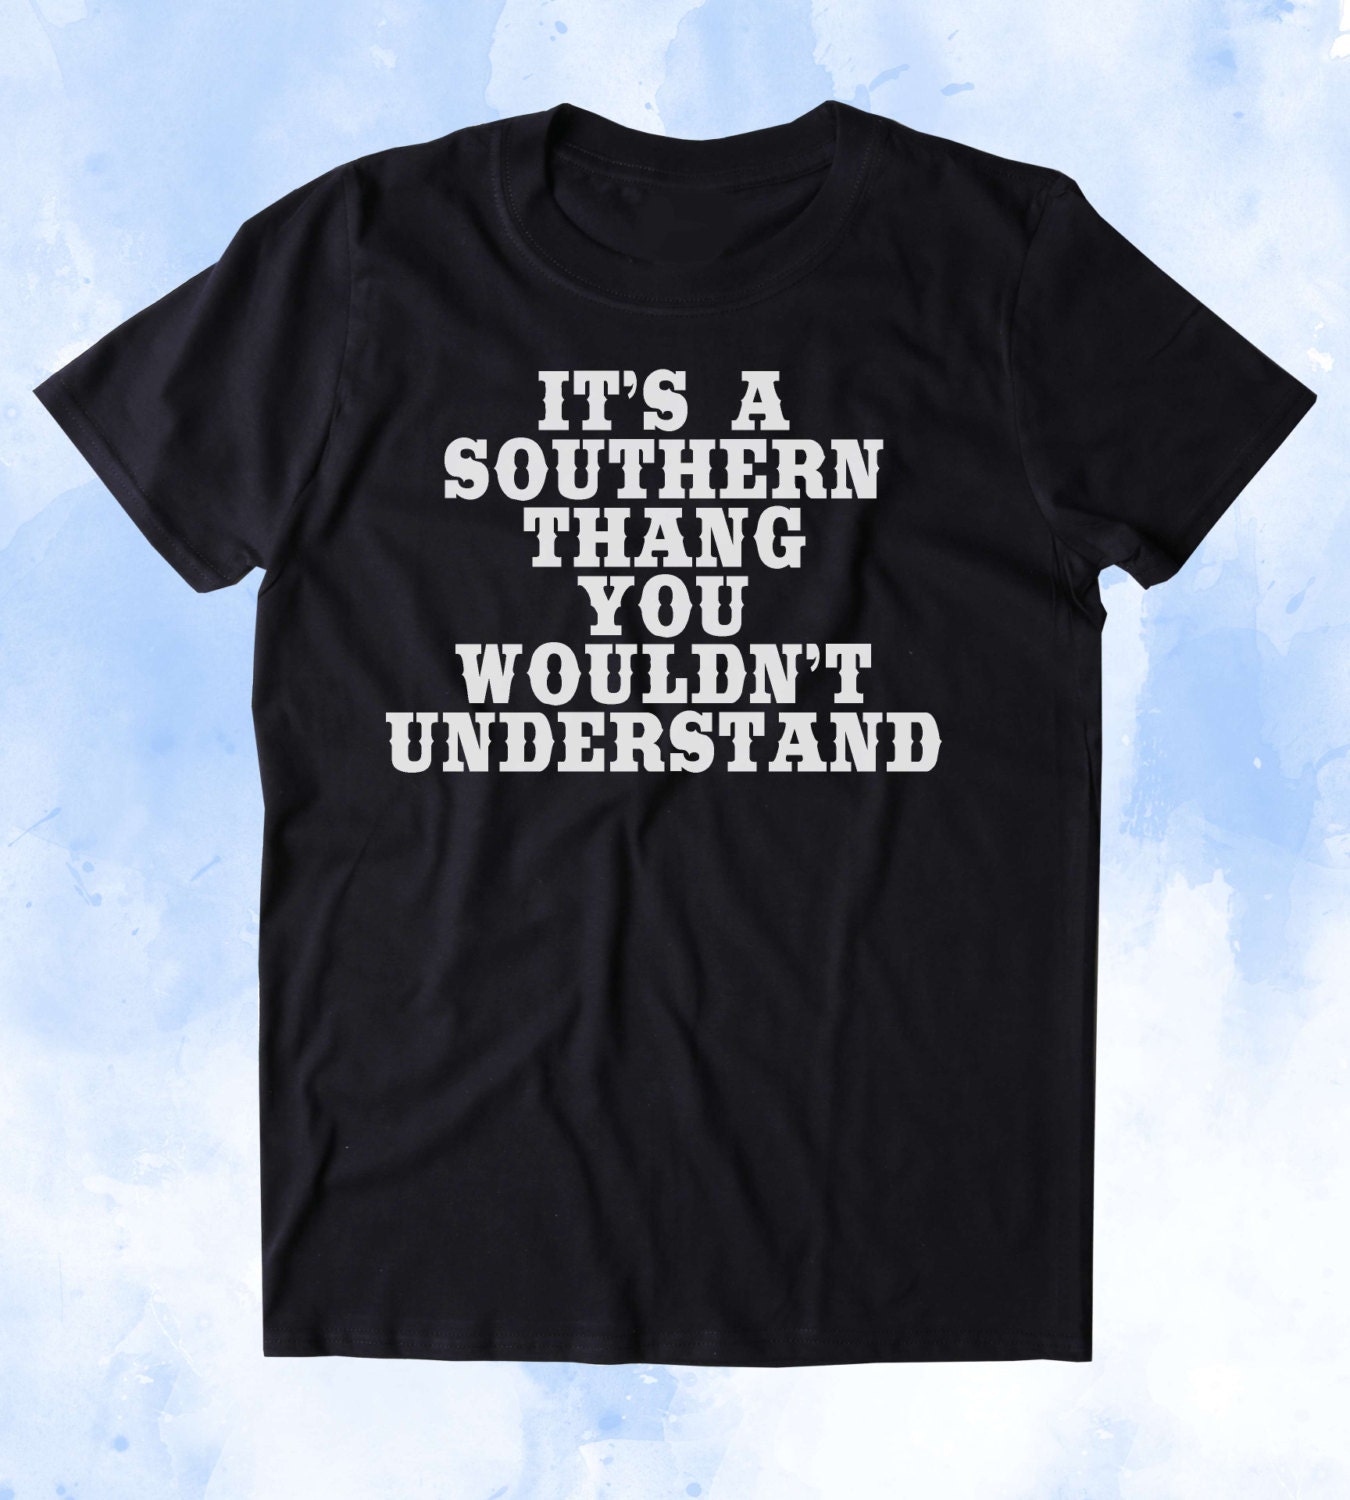 It's A Southern Thing You Wouldn't Understand Shirt